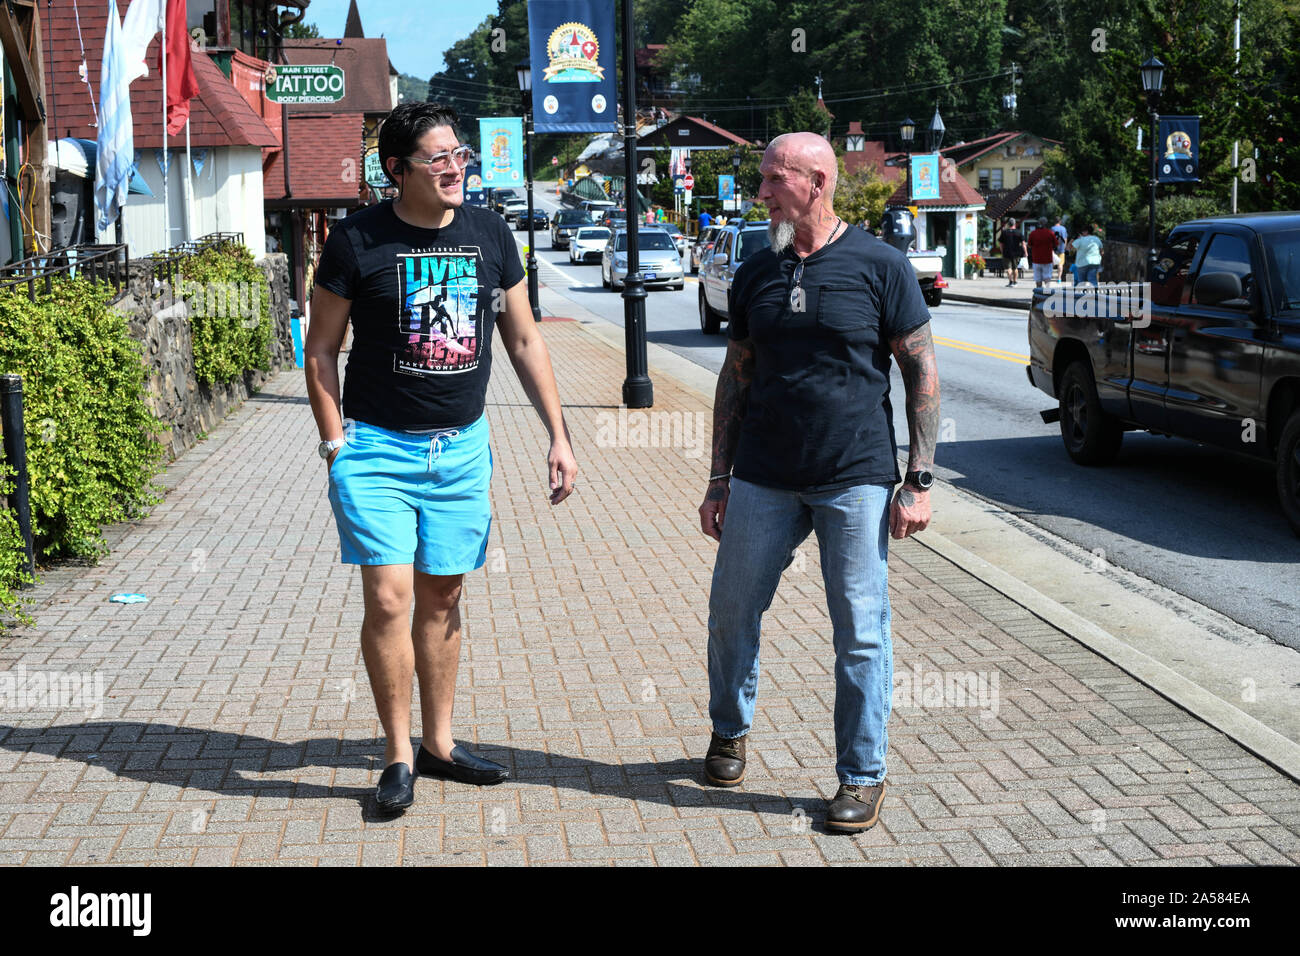 Dahlonega, Georgia, USA. 15th Sep, 2019. On right, Chester Doles, a self-declared white nationalist who said he shares '95 percent'' of Trump's agenda, walks with fellow withe nationalist Jovi Val at main street Helena, Ga, a Bavarian tourist town popular with exiled-Nazis in the 1950s and more recently, Doles and his colleagues. Credit: Miguel Juarez Lugo/ZUMA Wire/Alamy Live News Stock Photo